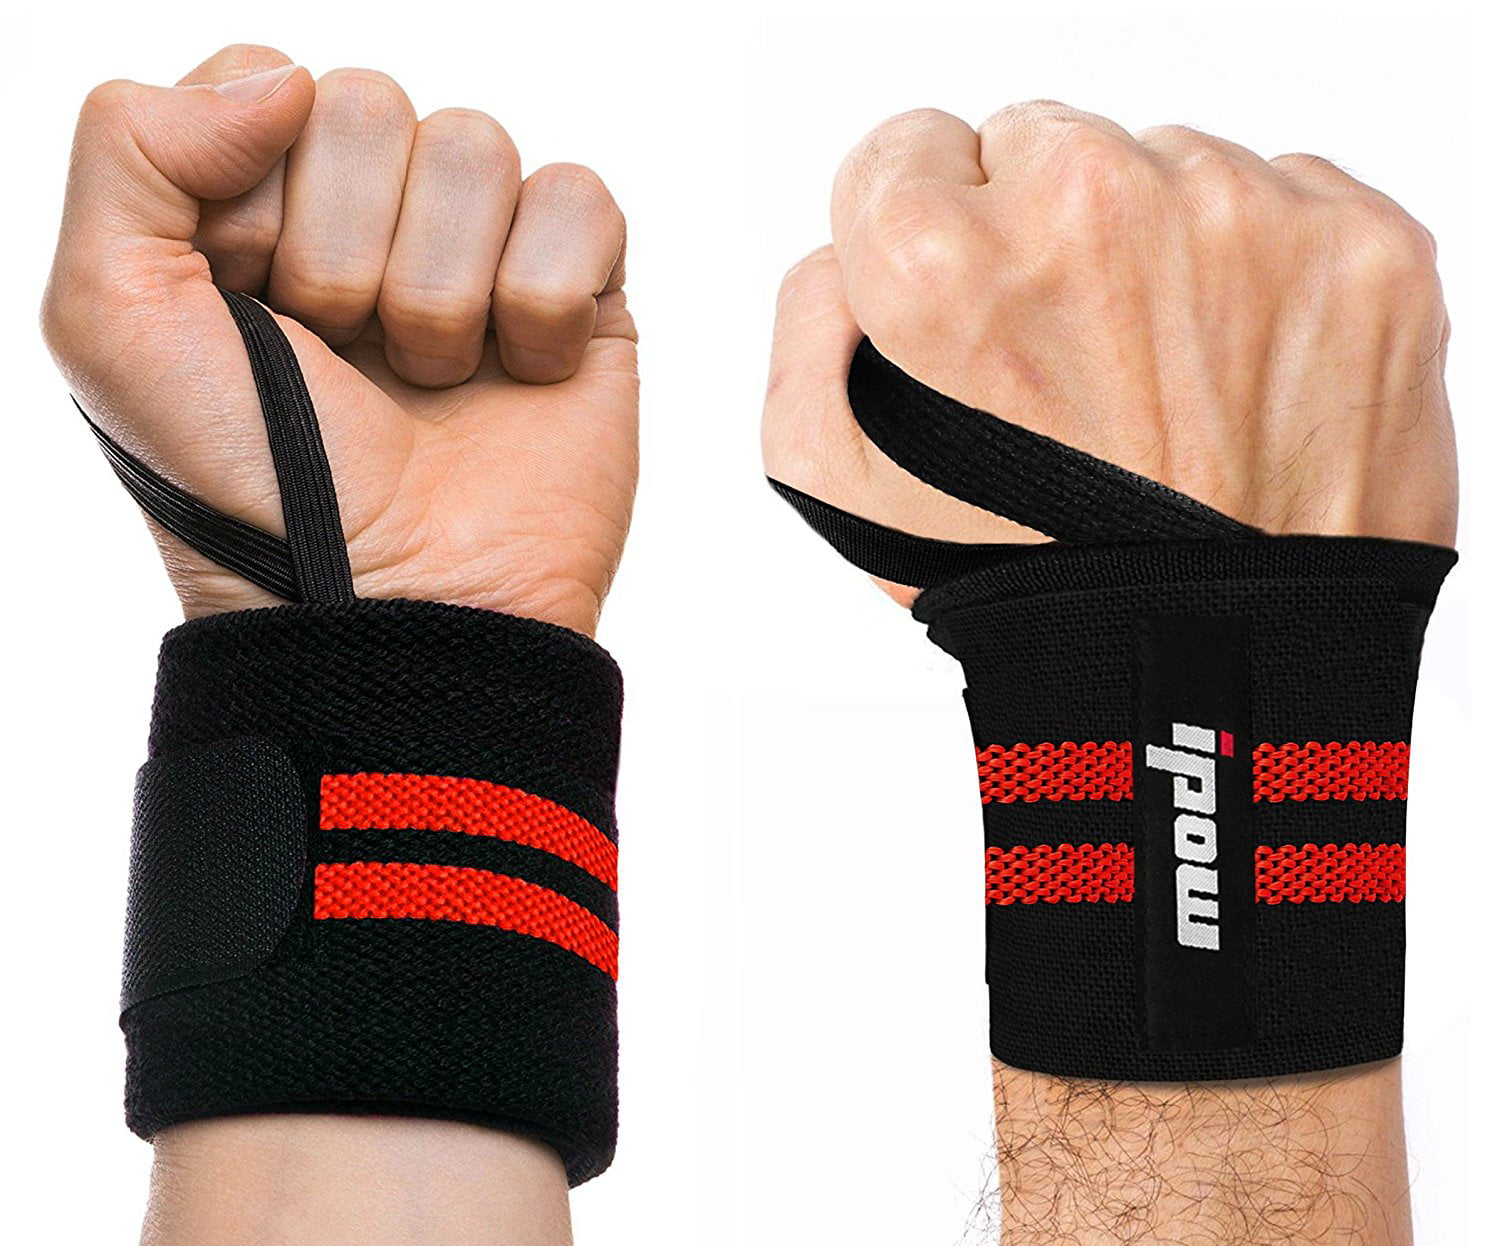 IPOW 2pcs Wrist Strap for Weight Lifting Women and Men, Adjustable